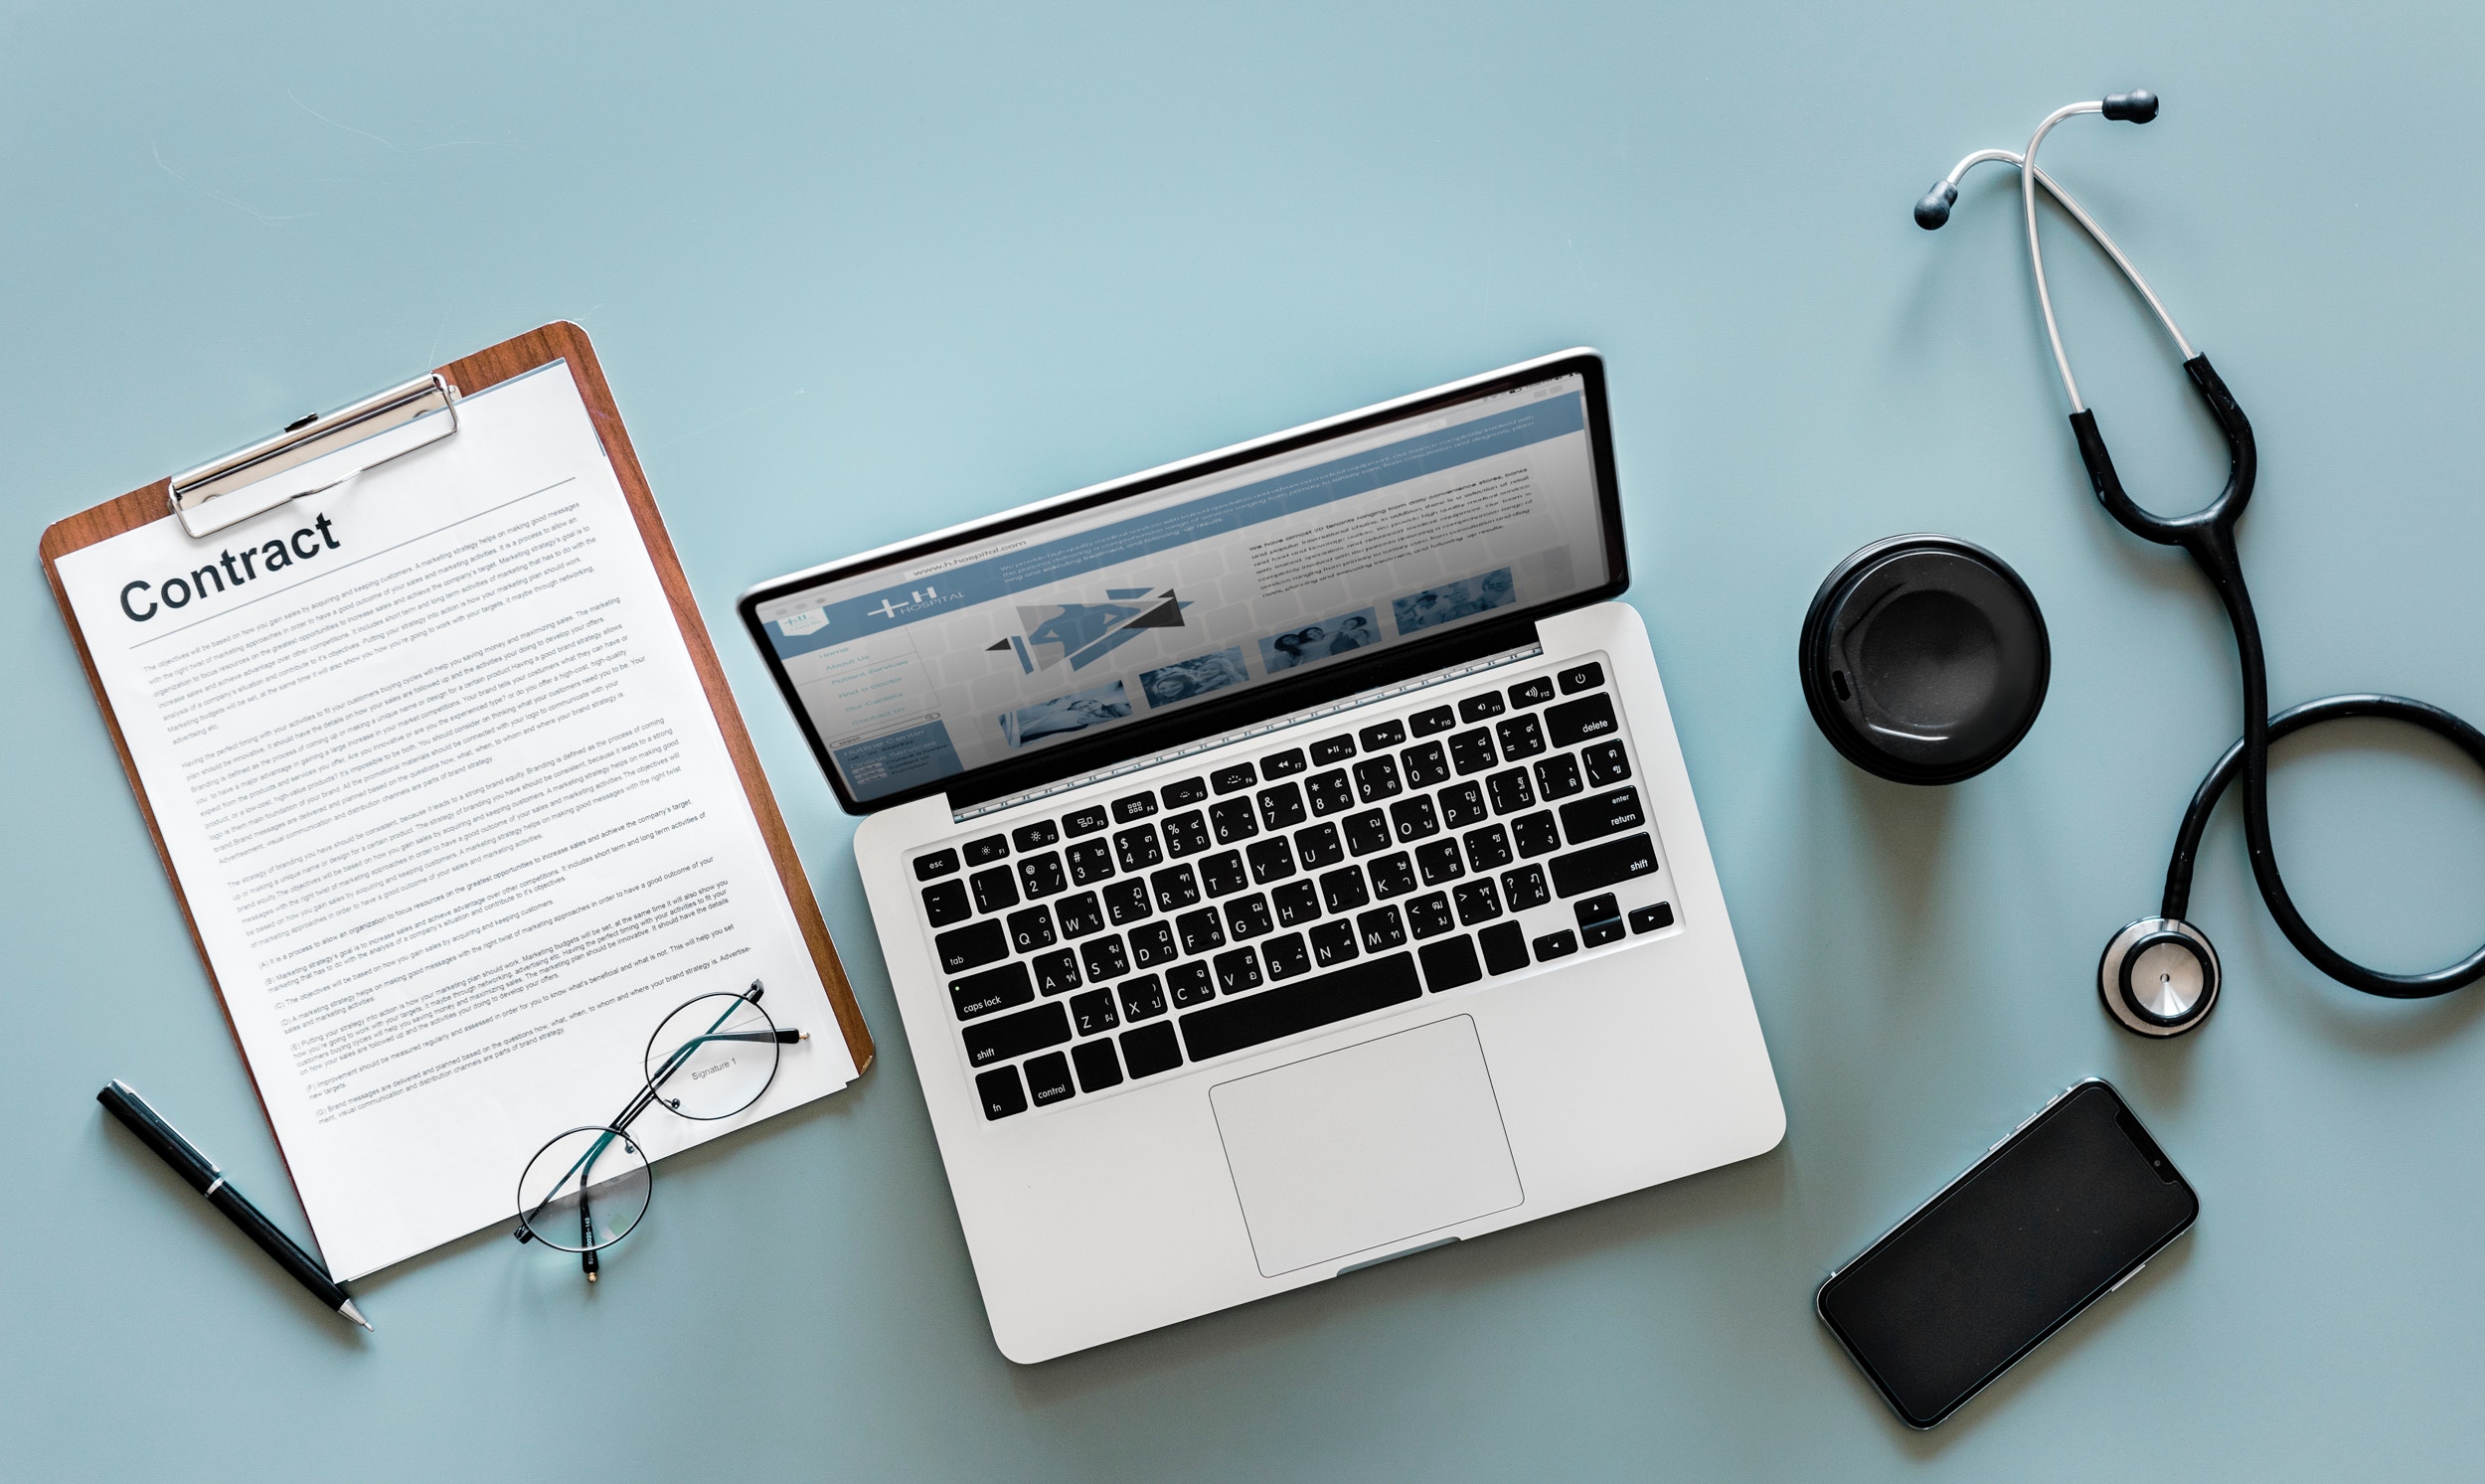 photograph of a pen, contract, reading glasses, laptop, phone, and stethoscope